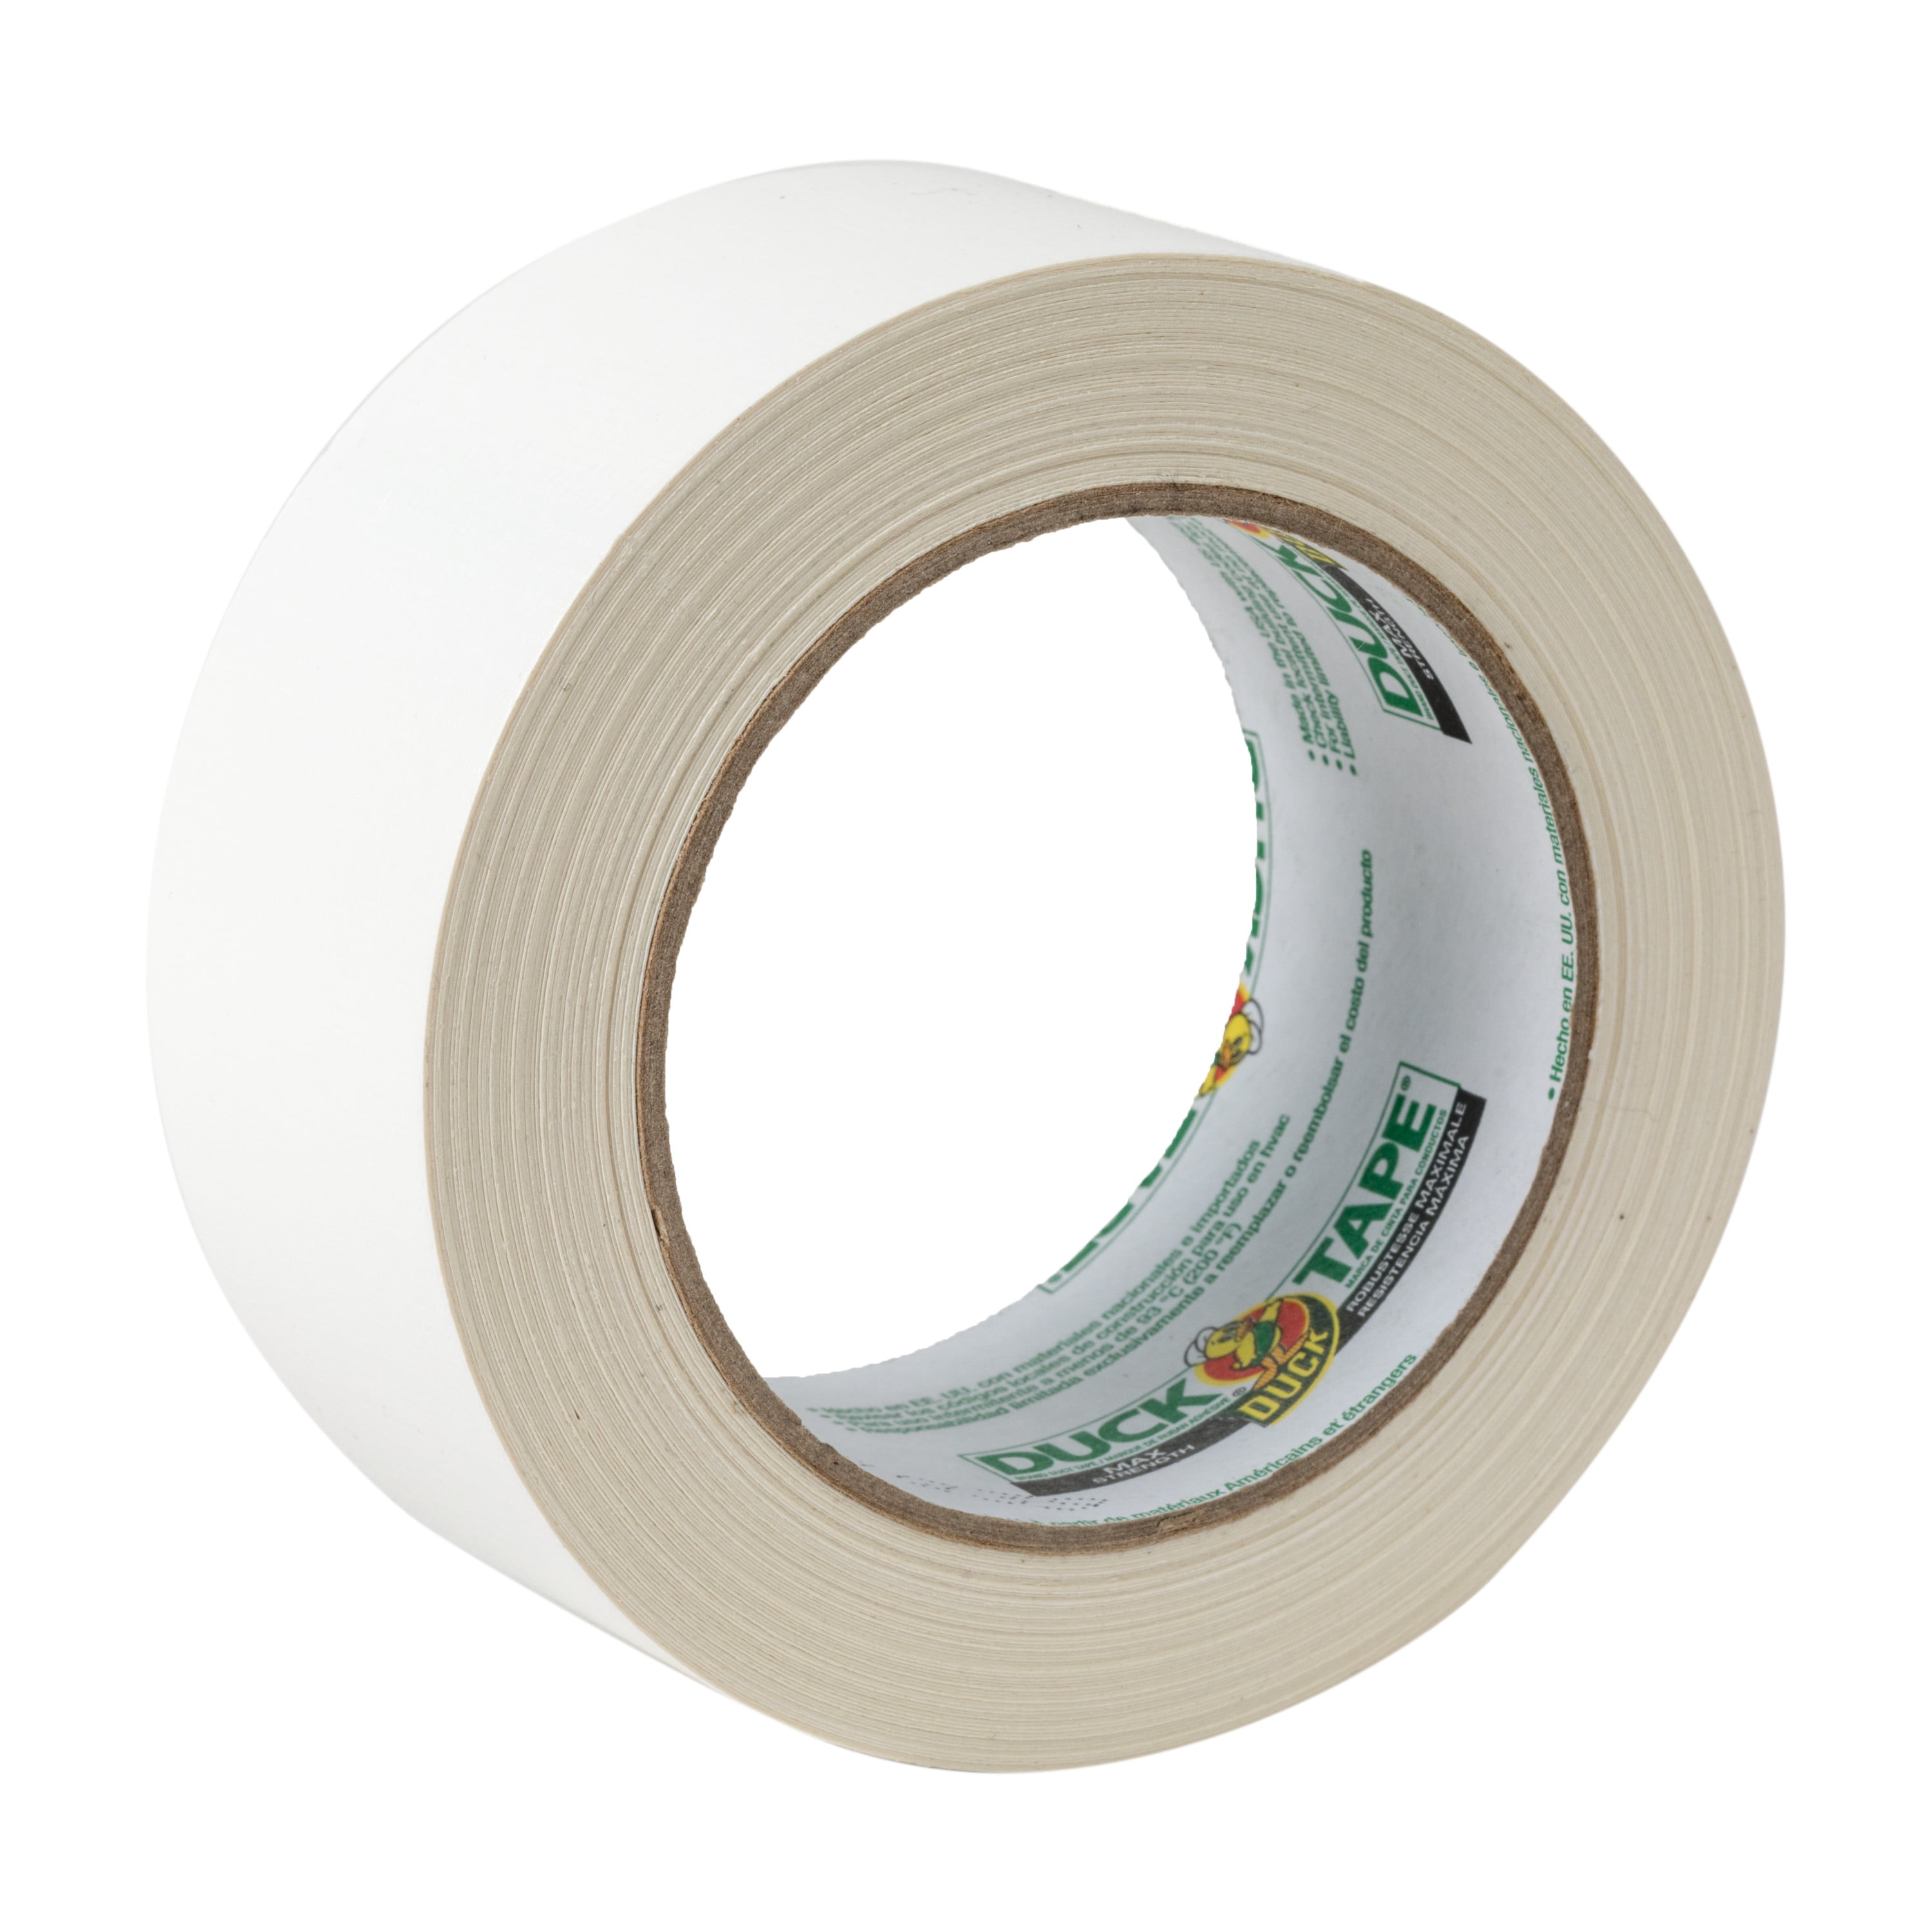 Duck Max Duct Tape, 1.88 x 20 yds, 3 Core, White